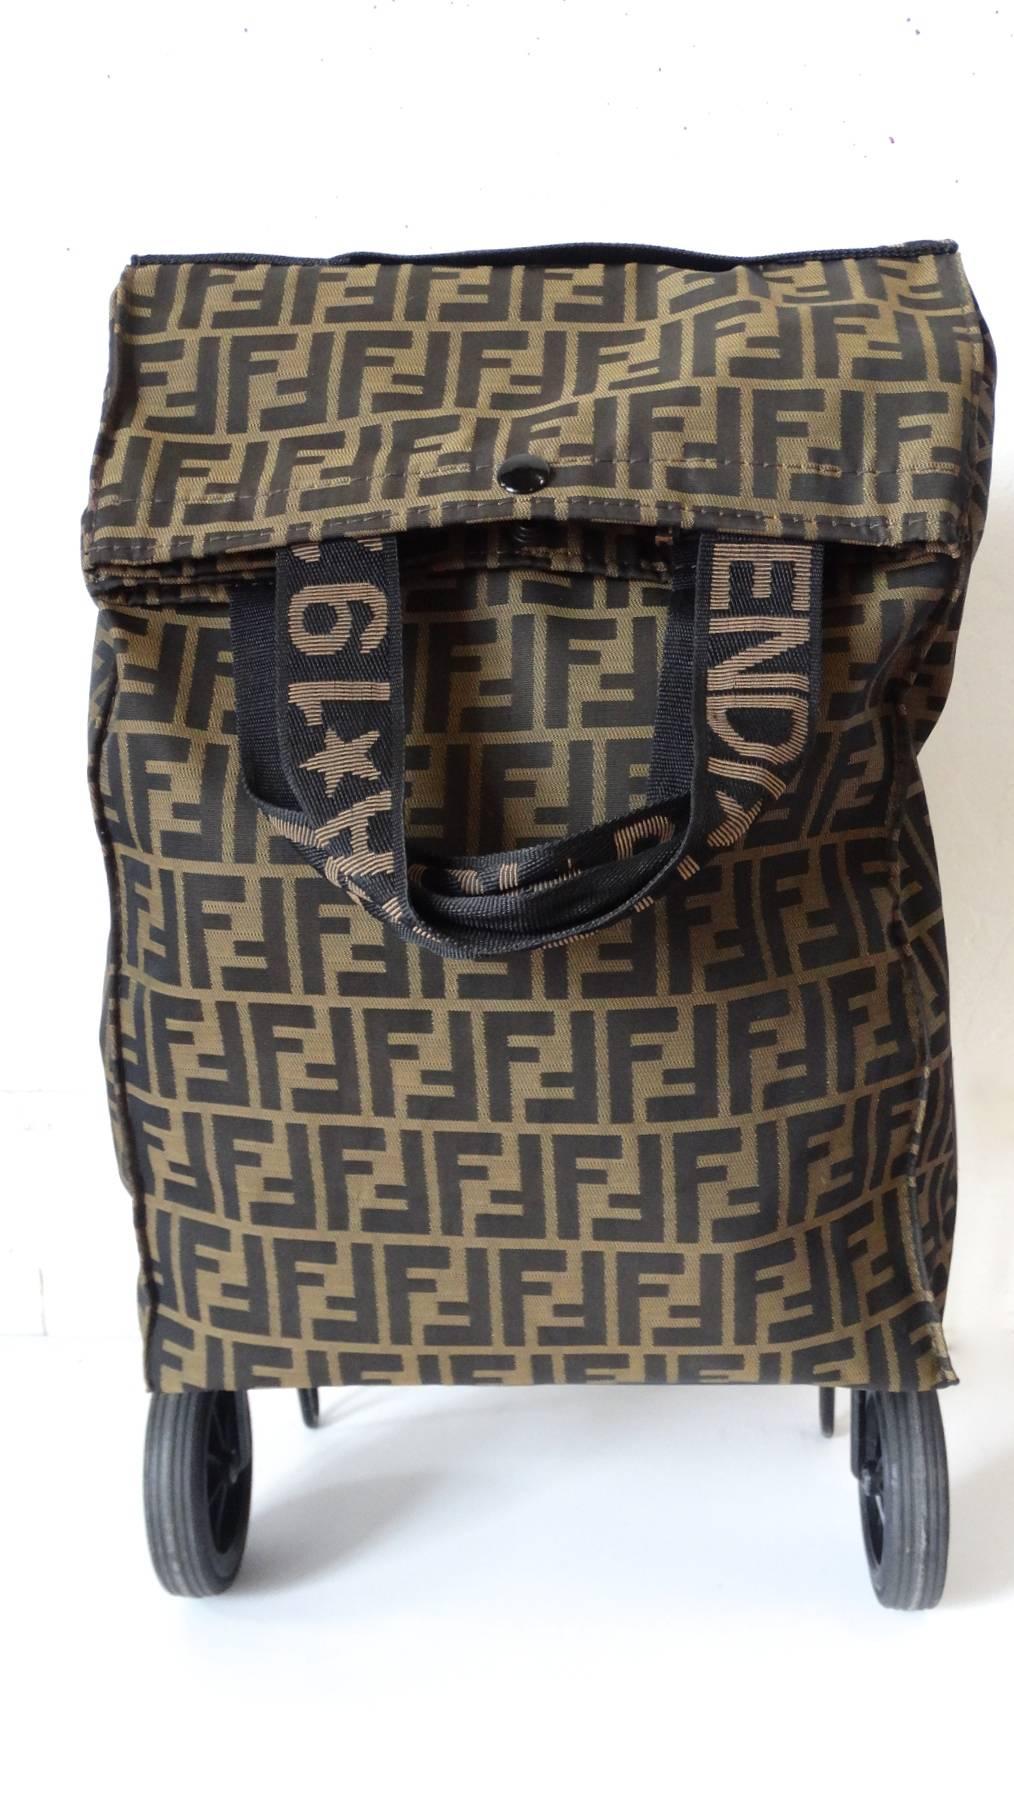 Travel in style with this amazing 1980s Fendi Zucca print 